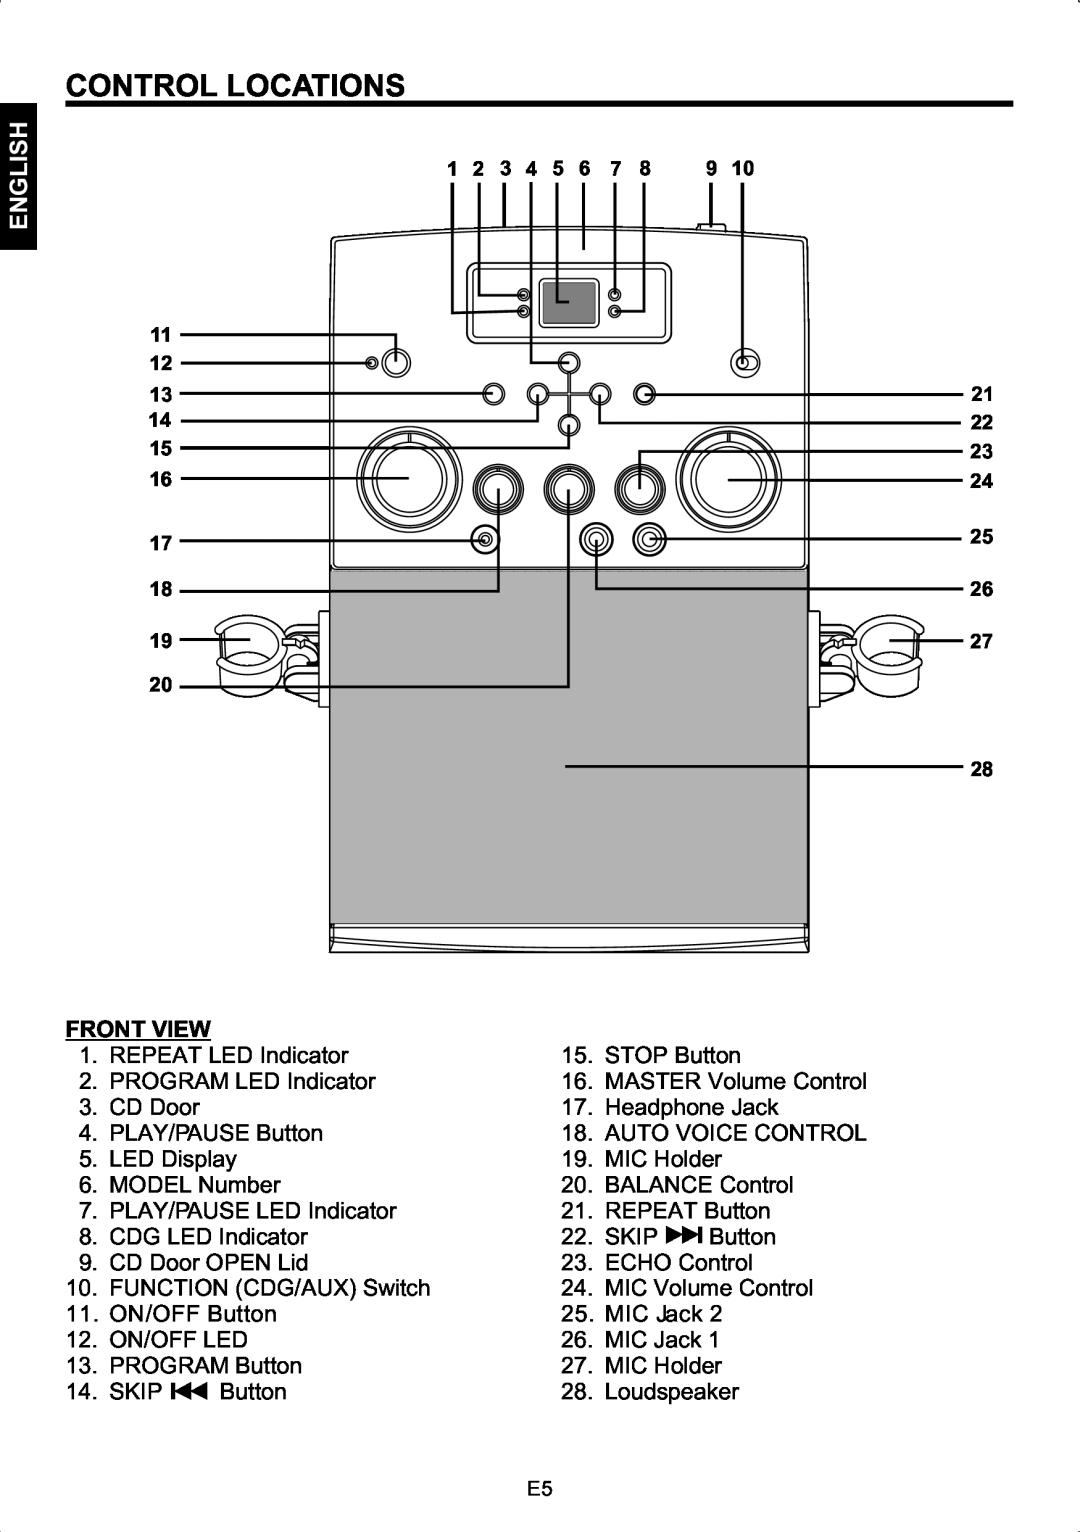 The Singing Machine SMG-158 instruction manual Control Locations, Front View, English 